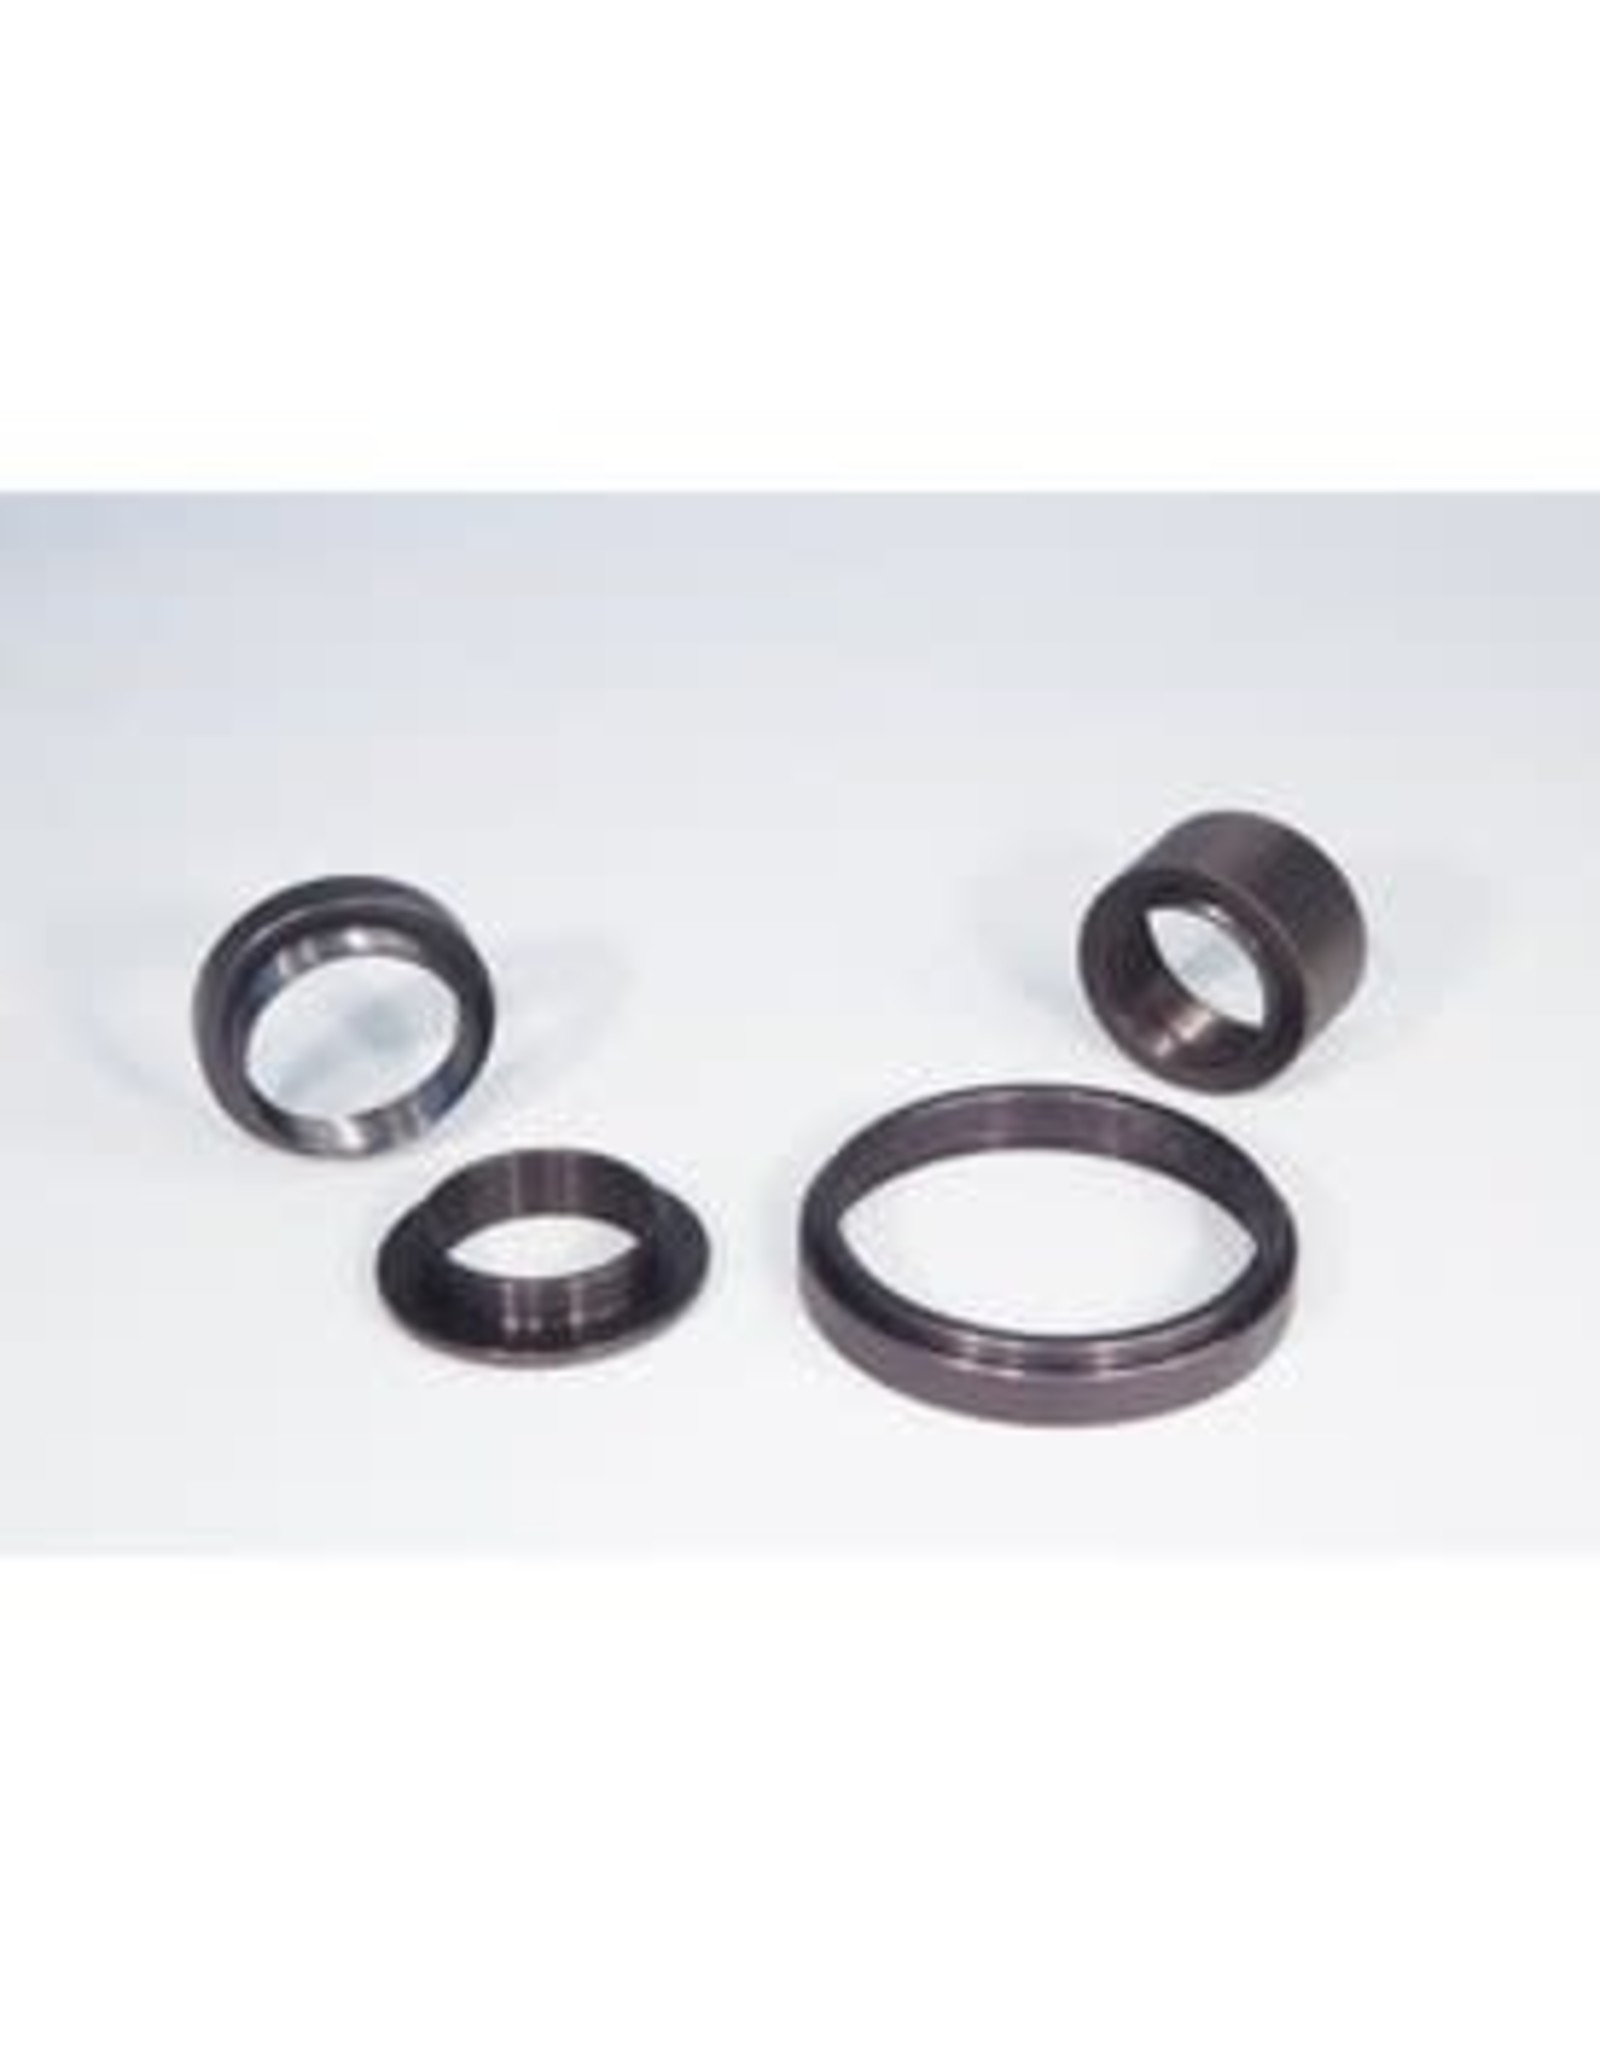 Takahashi Takahashi Sky 90 or New Q Reducer Adapter/Spacer for SBIG STL-Series CCD Cameras